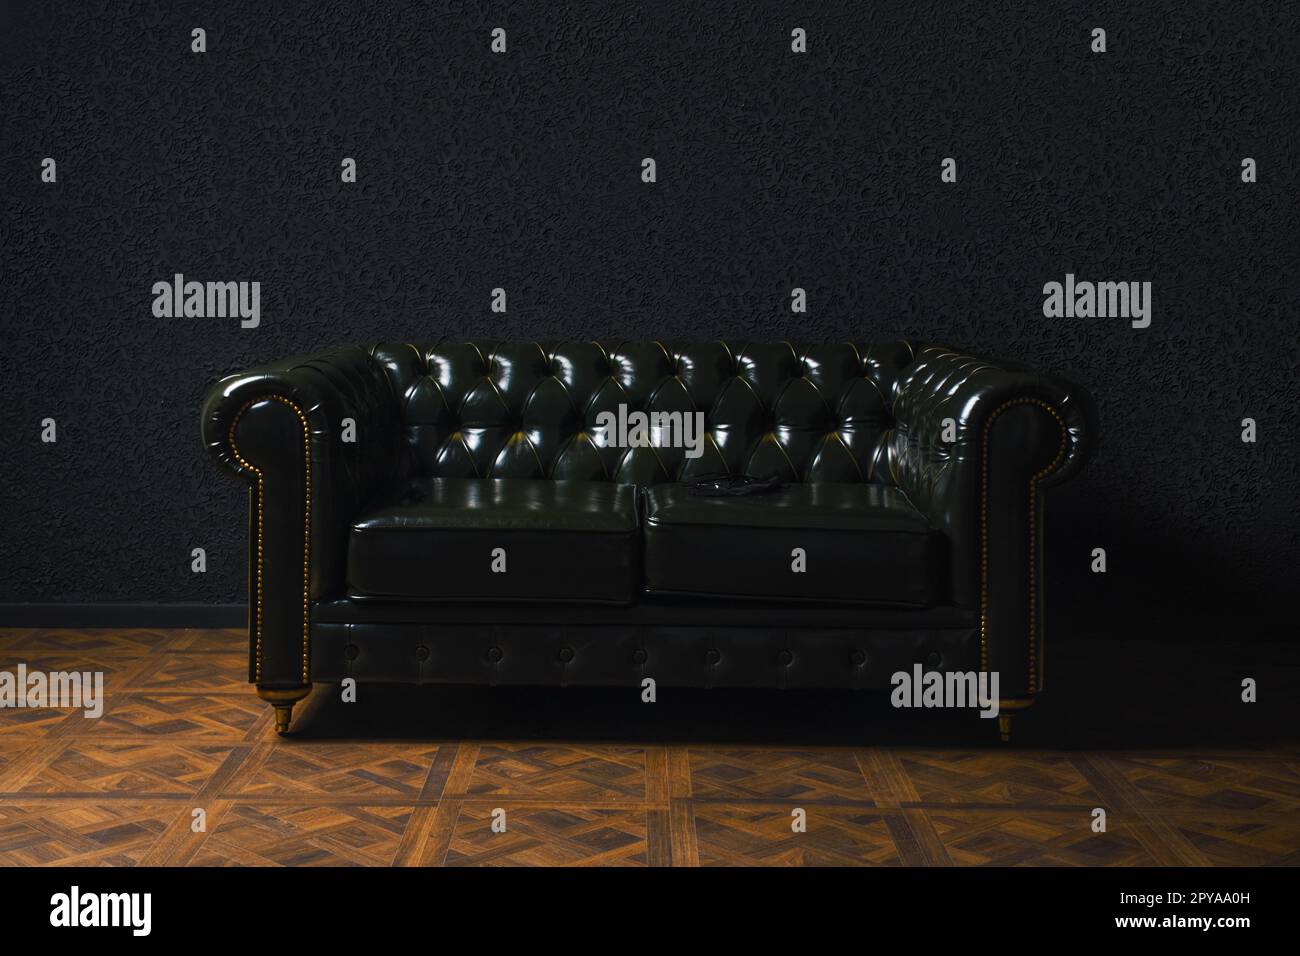 Glossy leather couch next to black wall Stock Photo